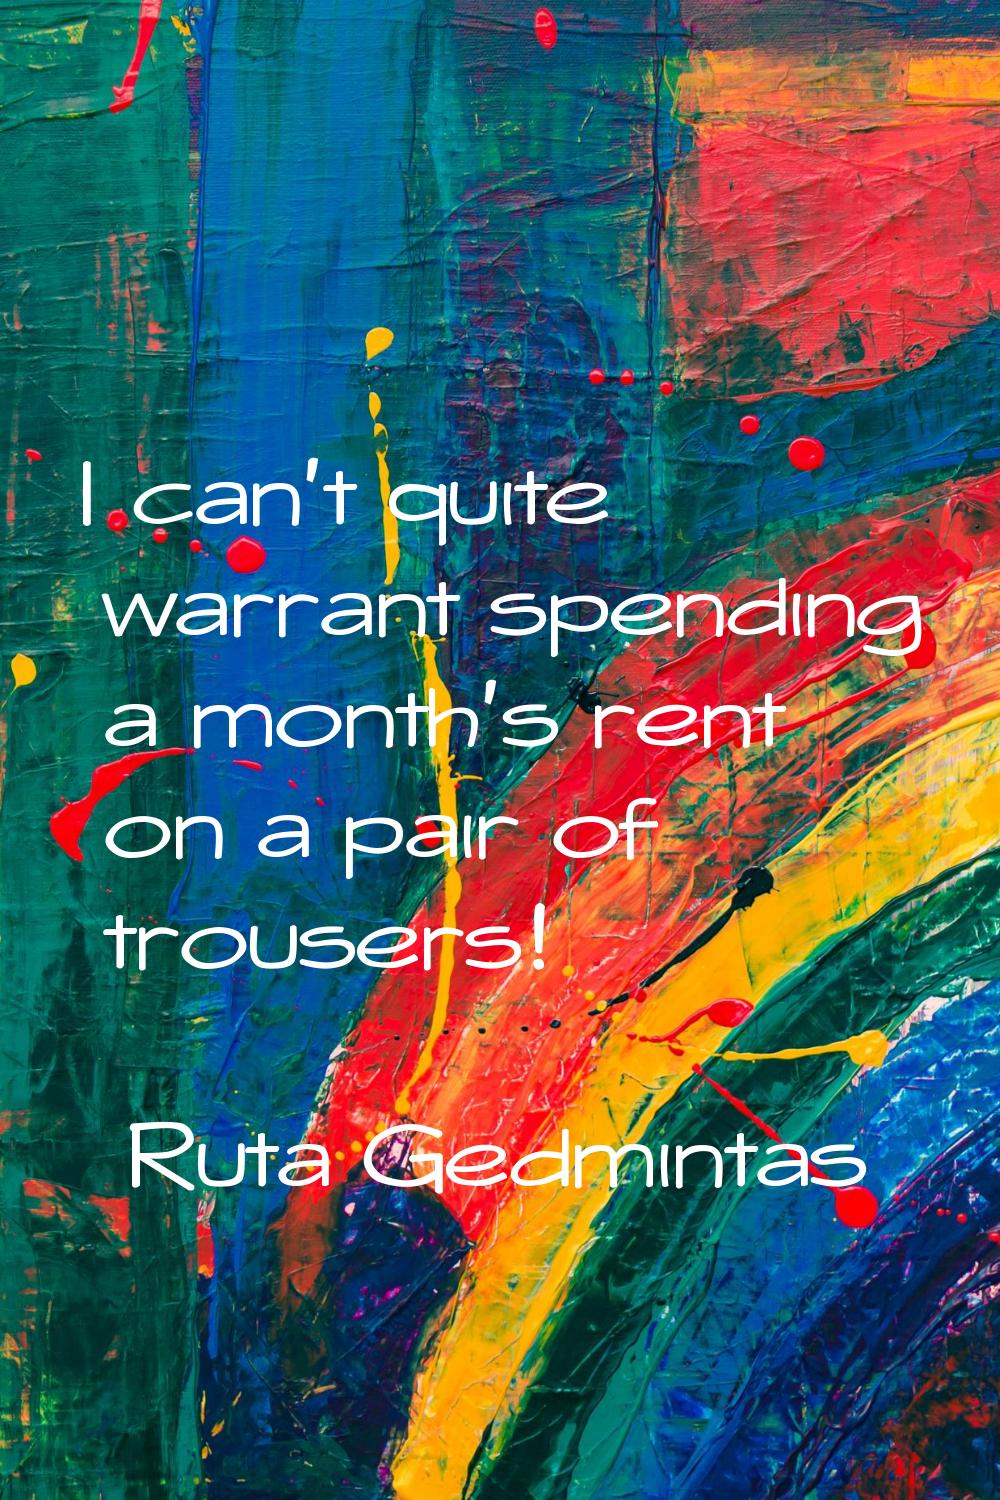 I can't quite warrant spending a month's rent on a pair of trousers!